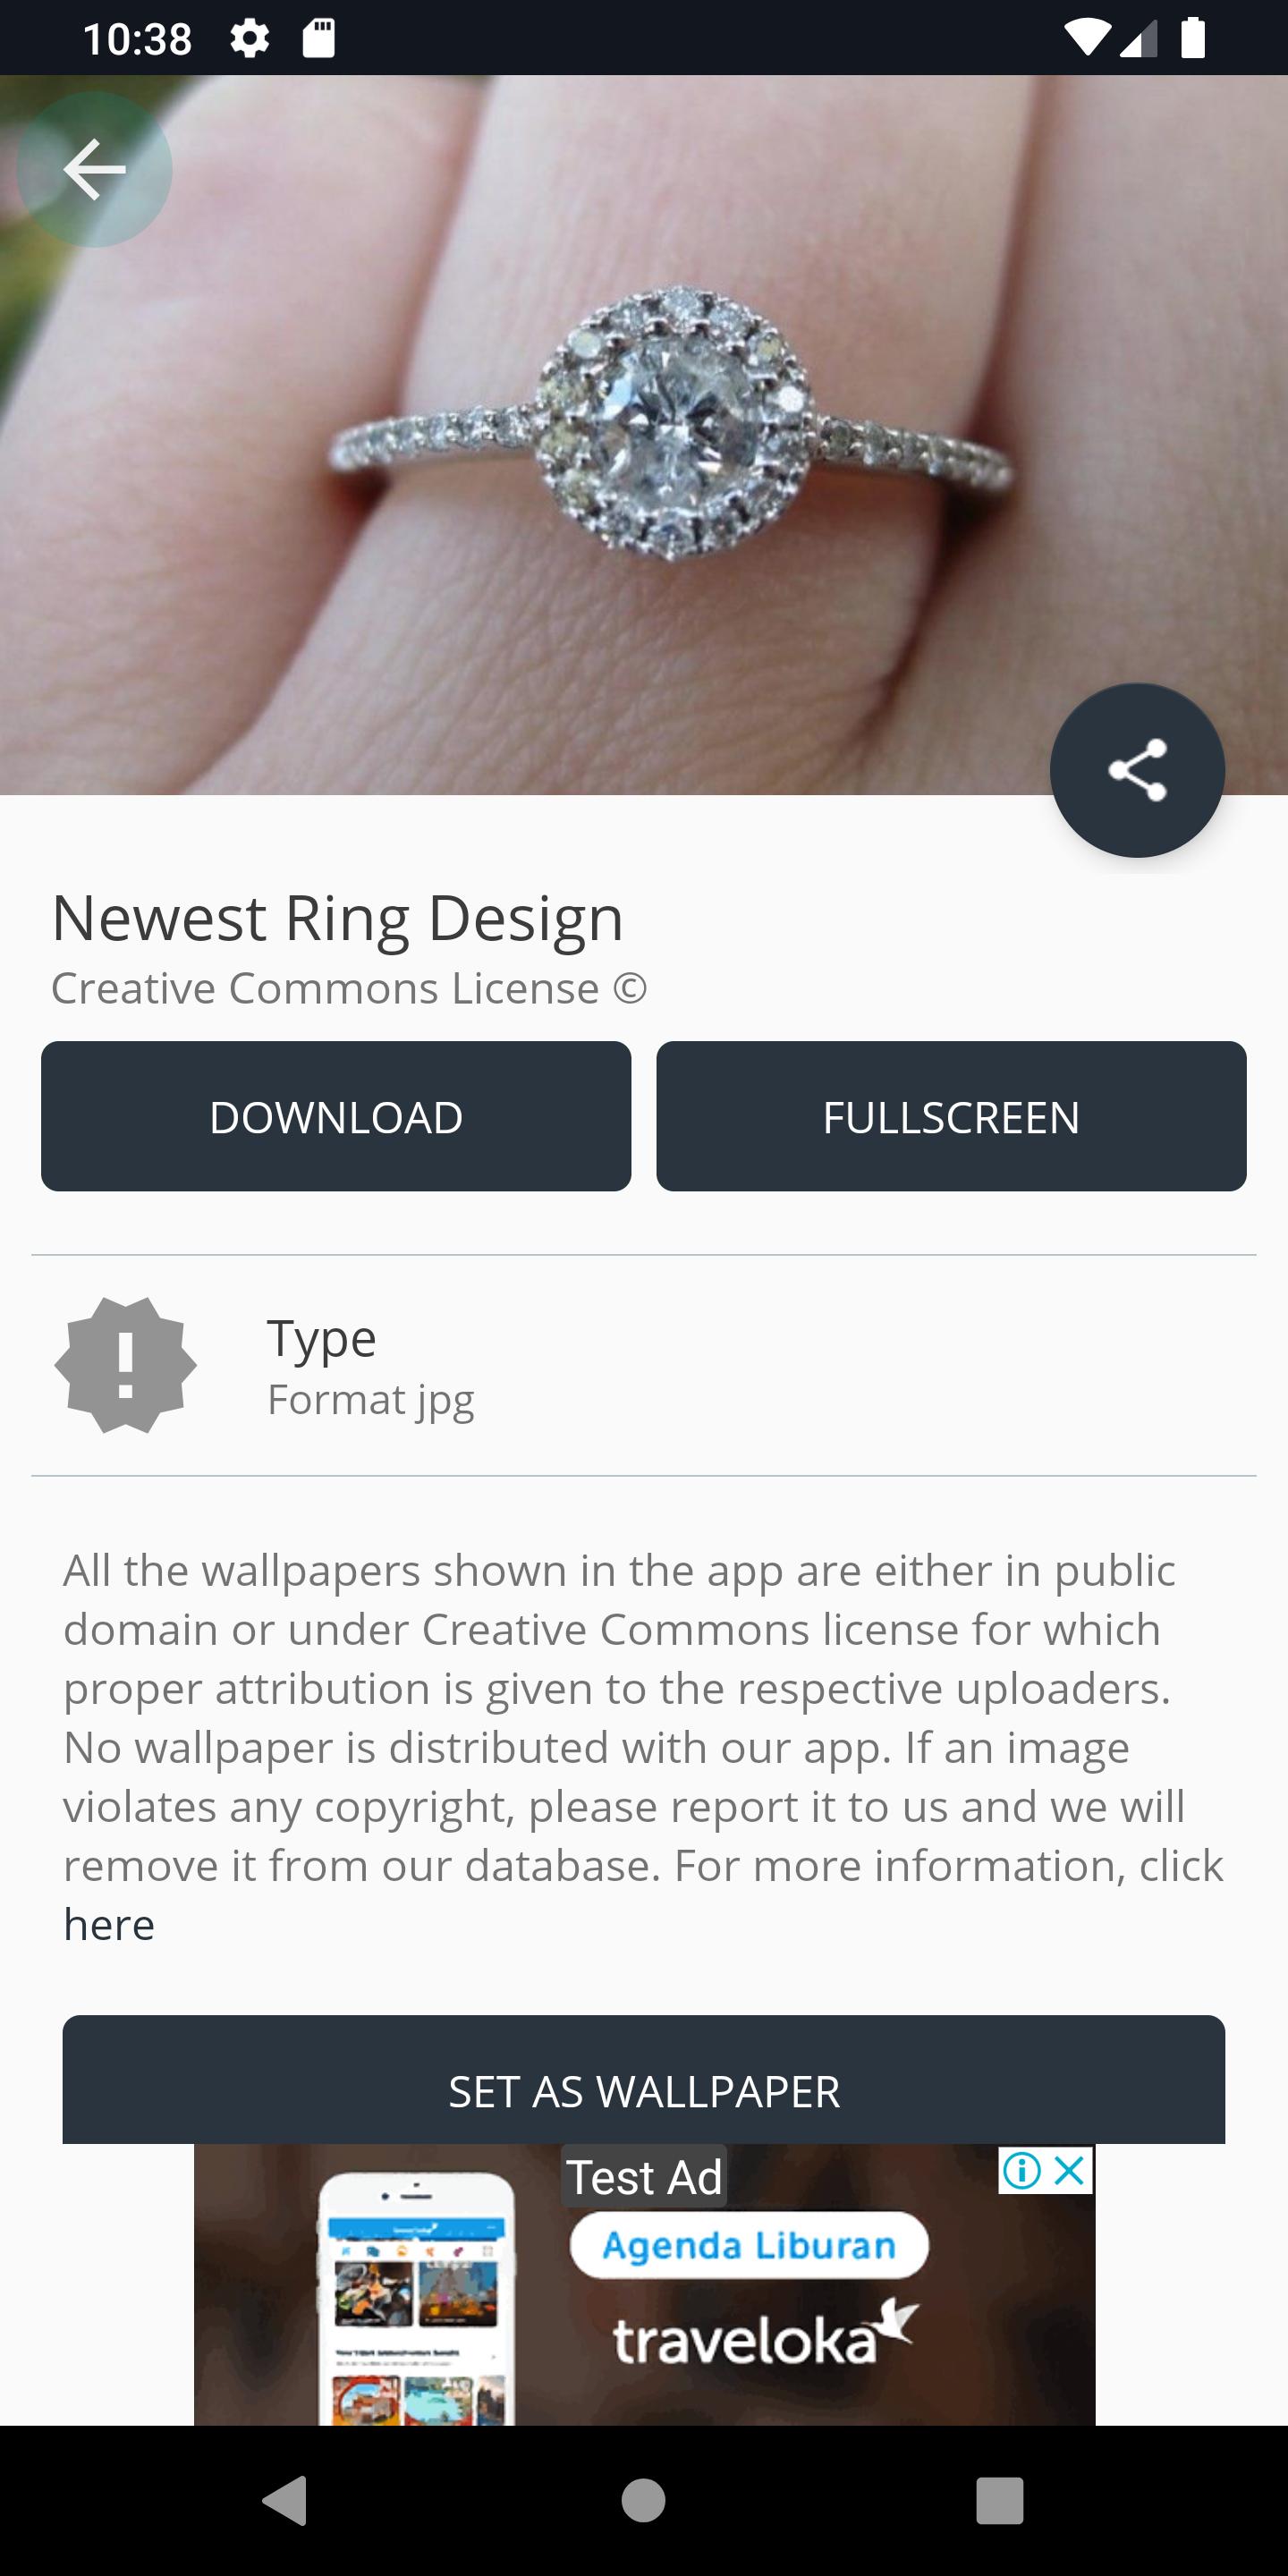 Newest Ring Design for Android - APK Download